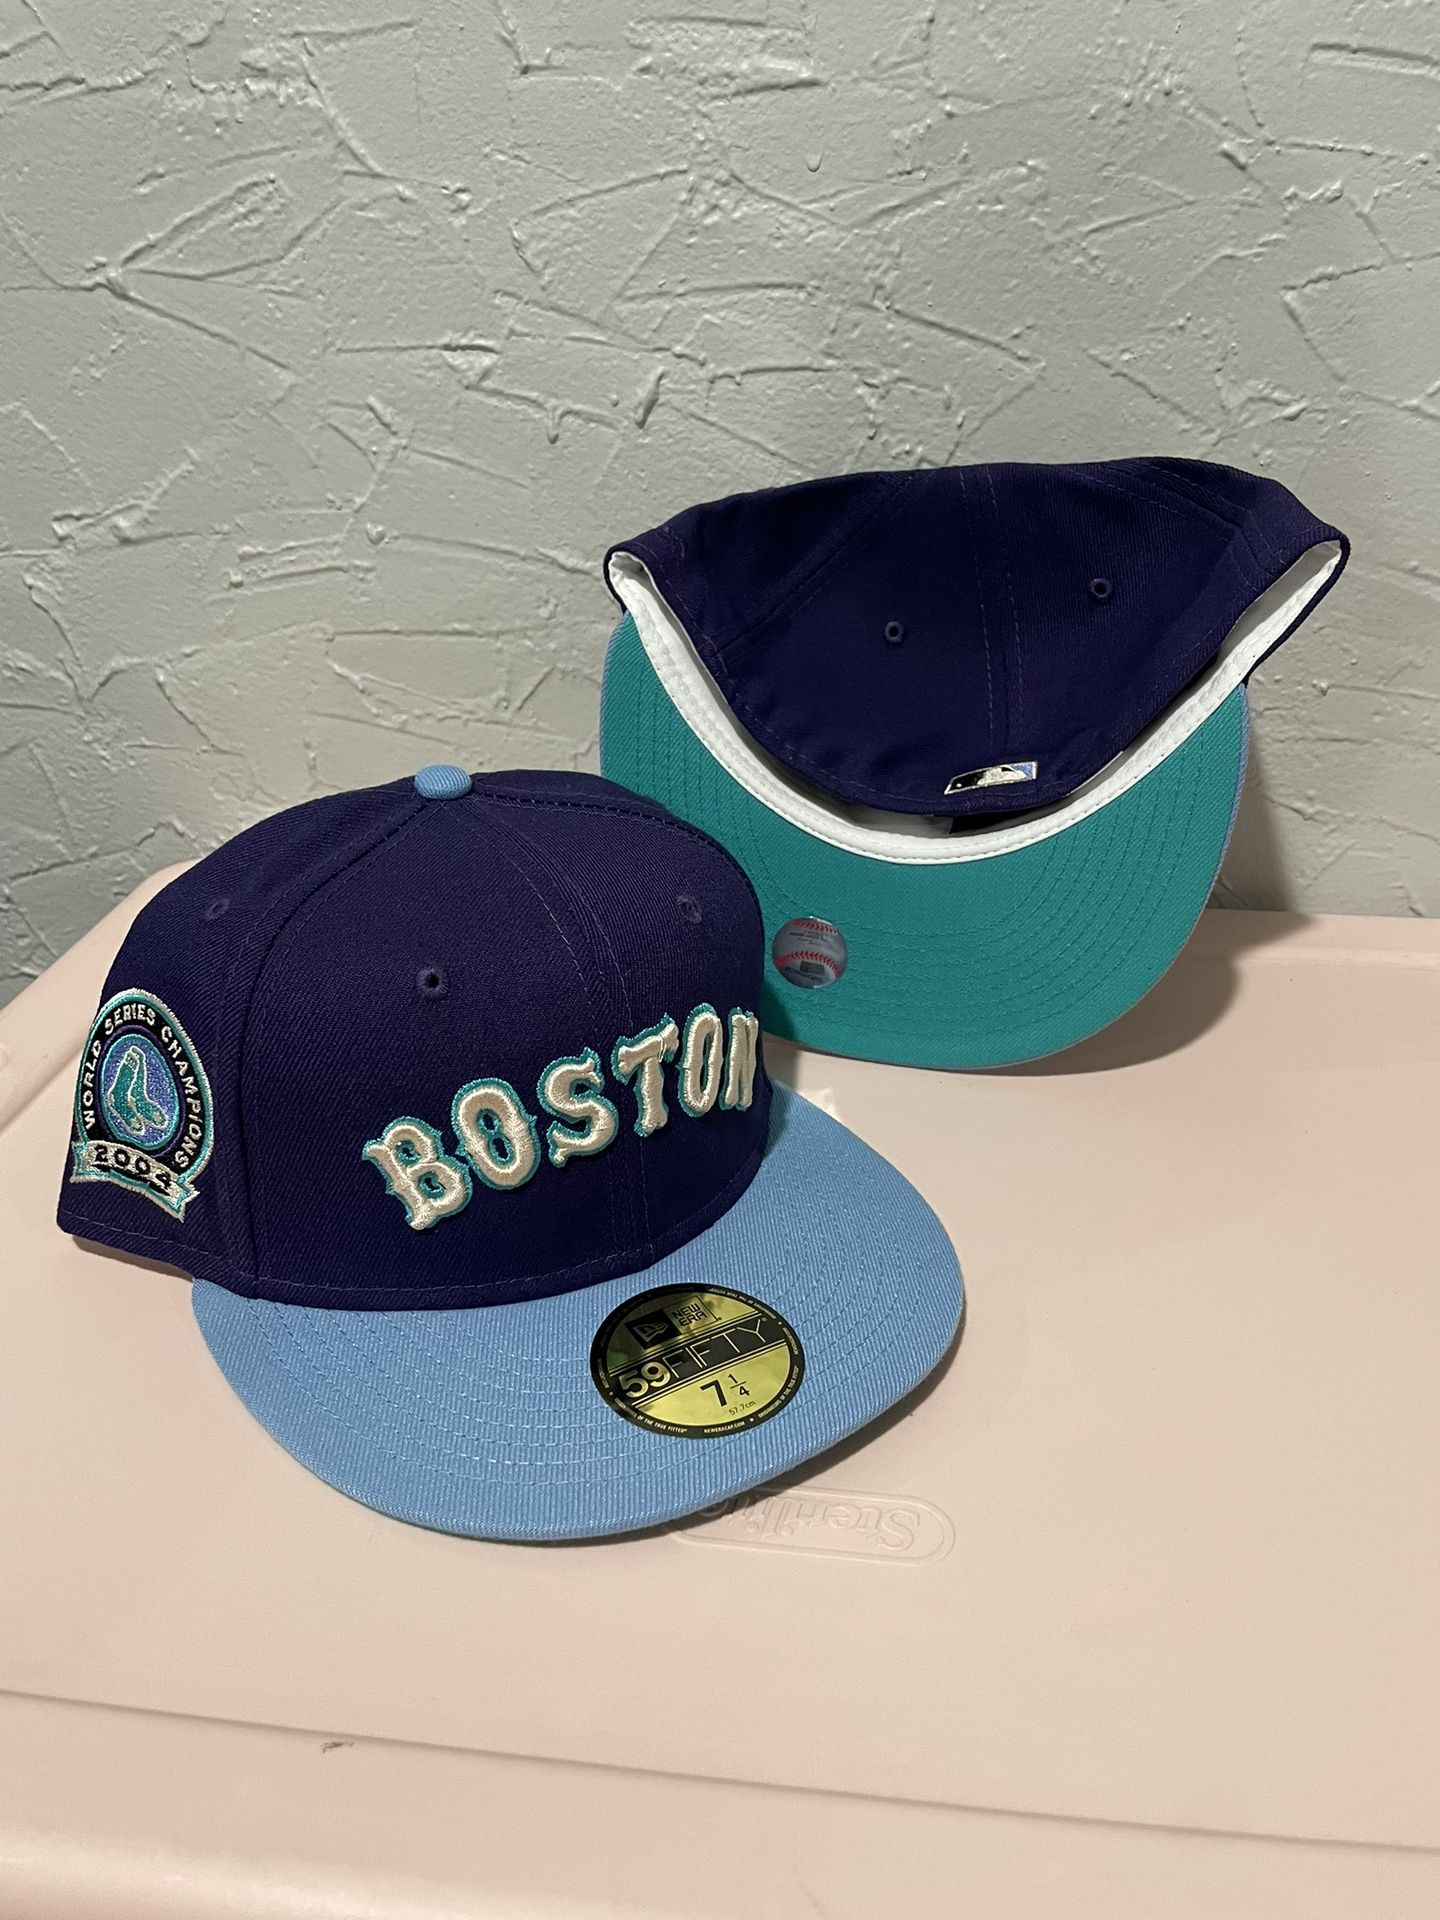 MLB New Era Boston Red Sox Purple Sky 2004 World Series Champs Patch 59fifty Fitted Hats Size 7 1/8, 7 1/4, 7 3/8 And 7 1/2 